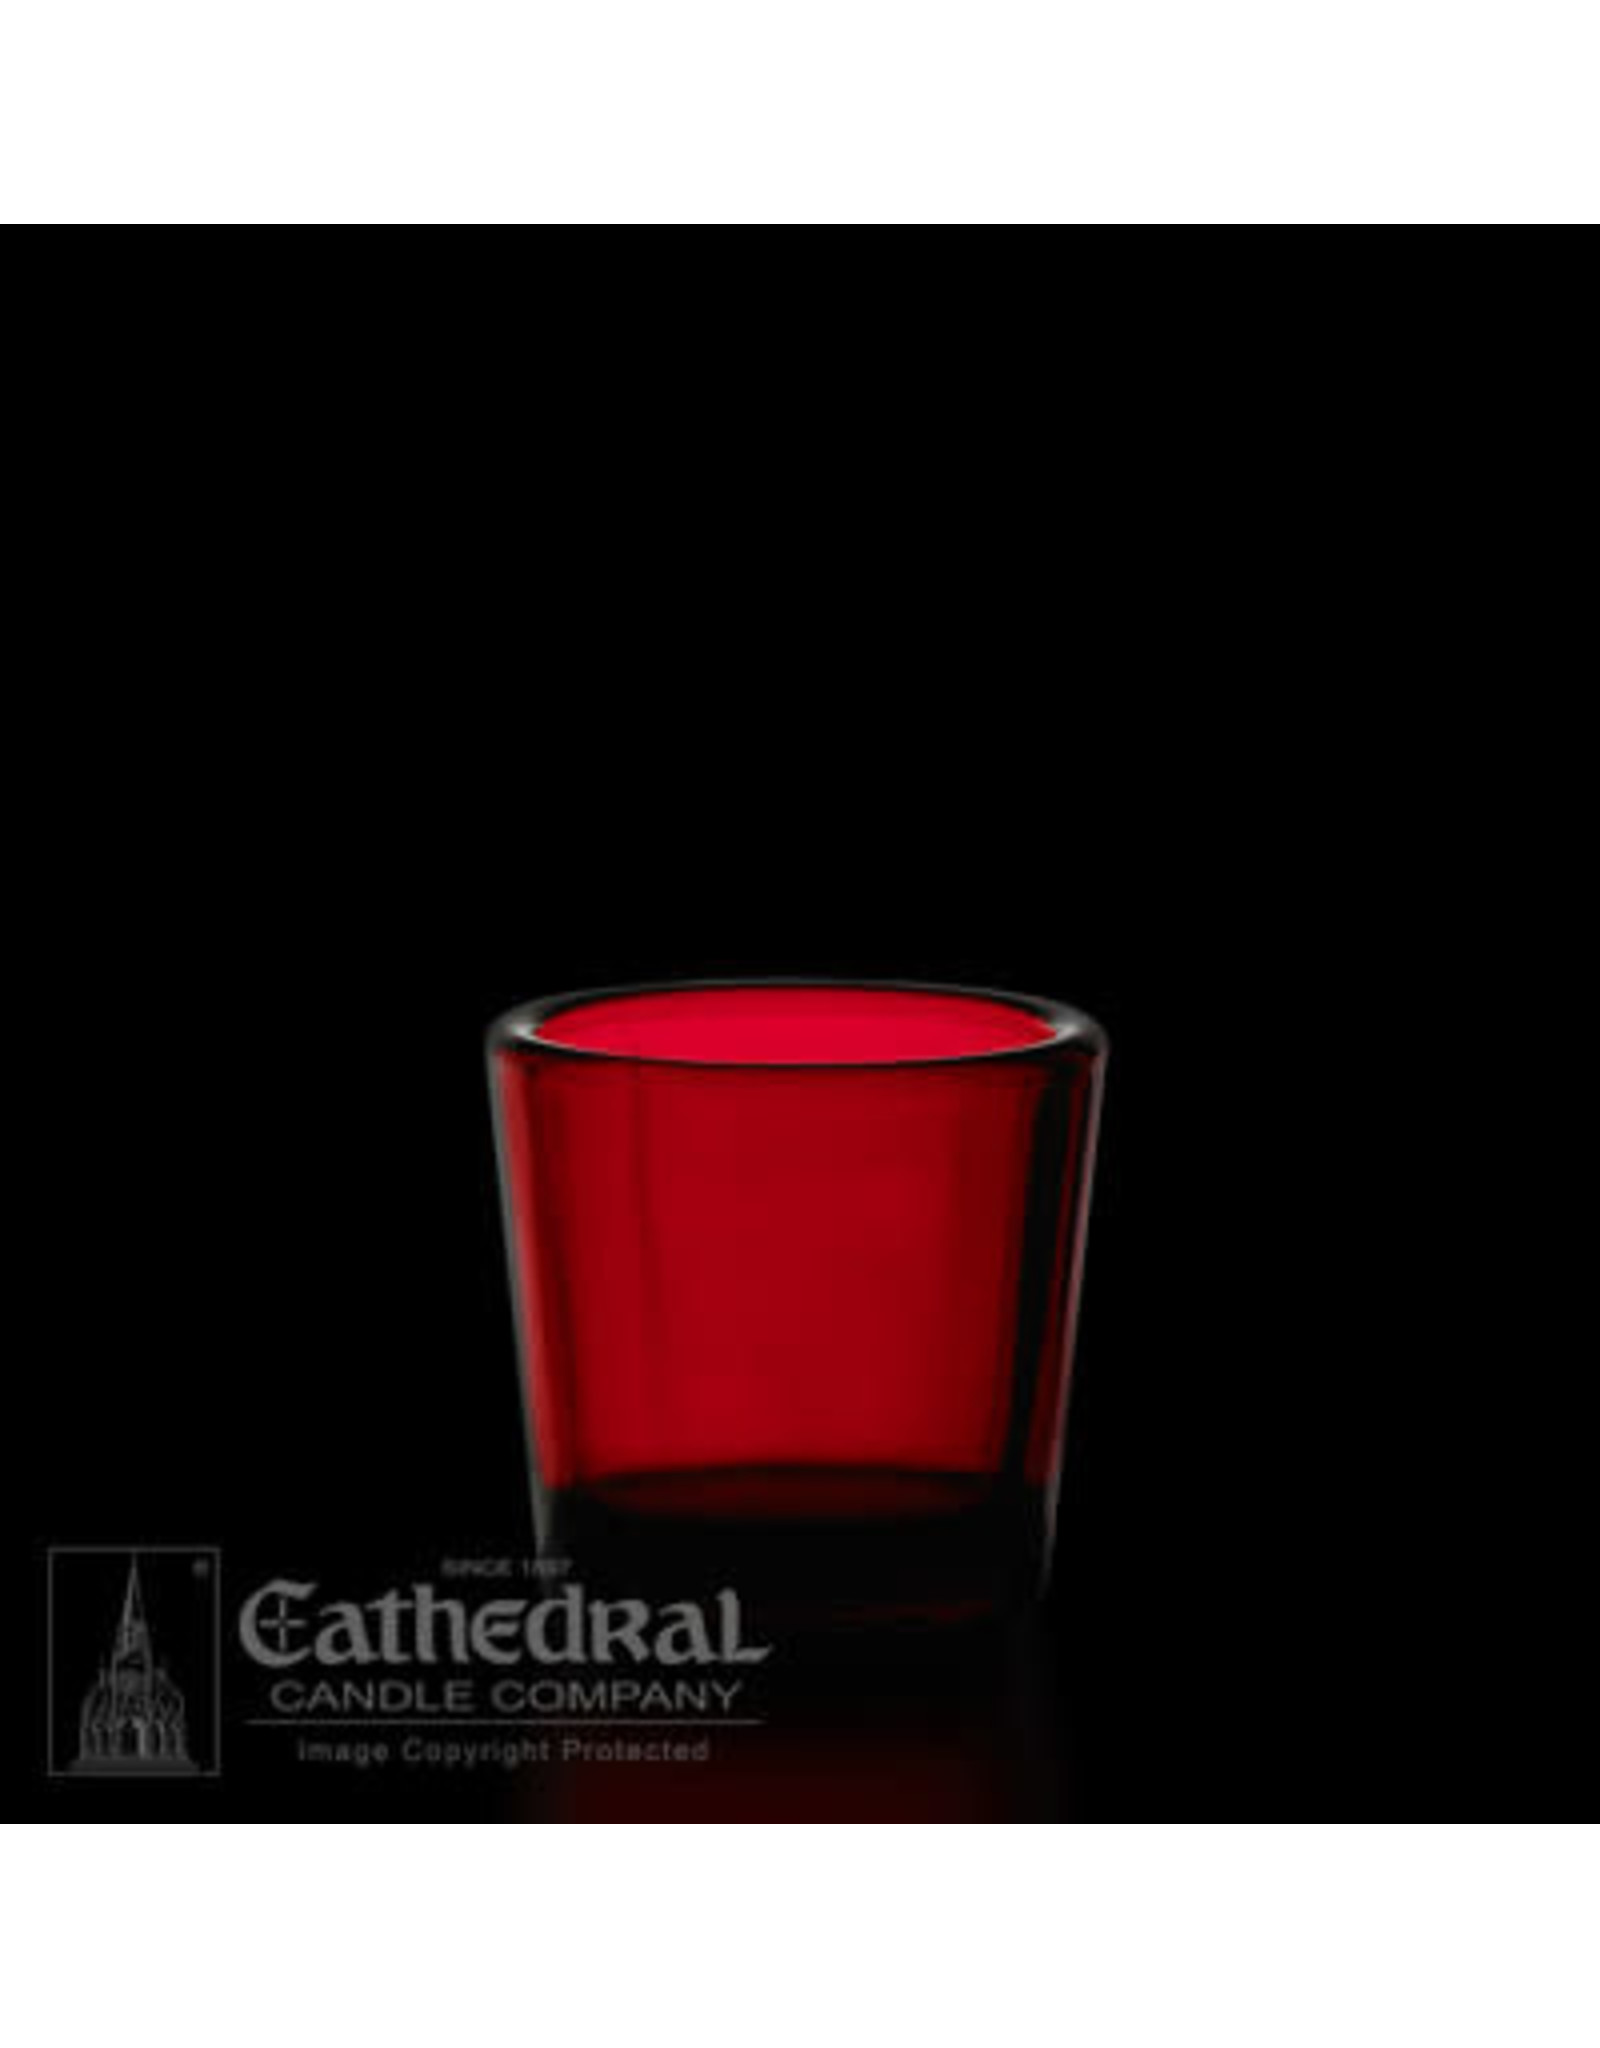 Cathedral Candle Votive Light Glass - Ruby, 2-10 Hour (Each)